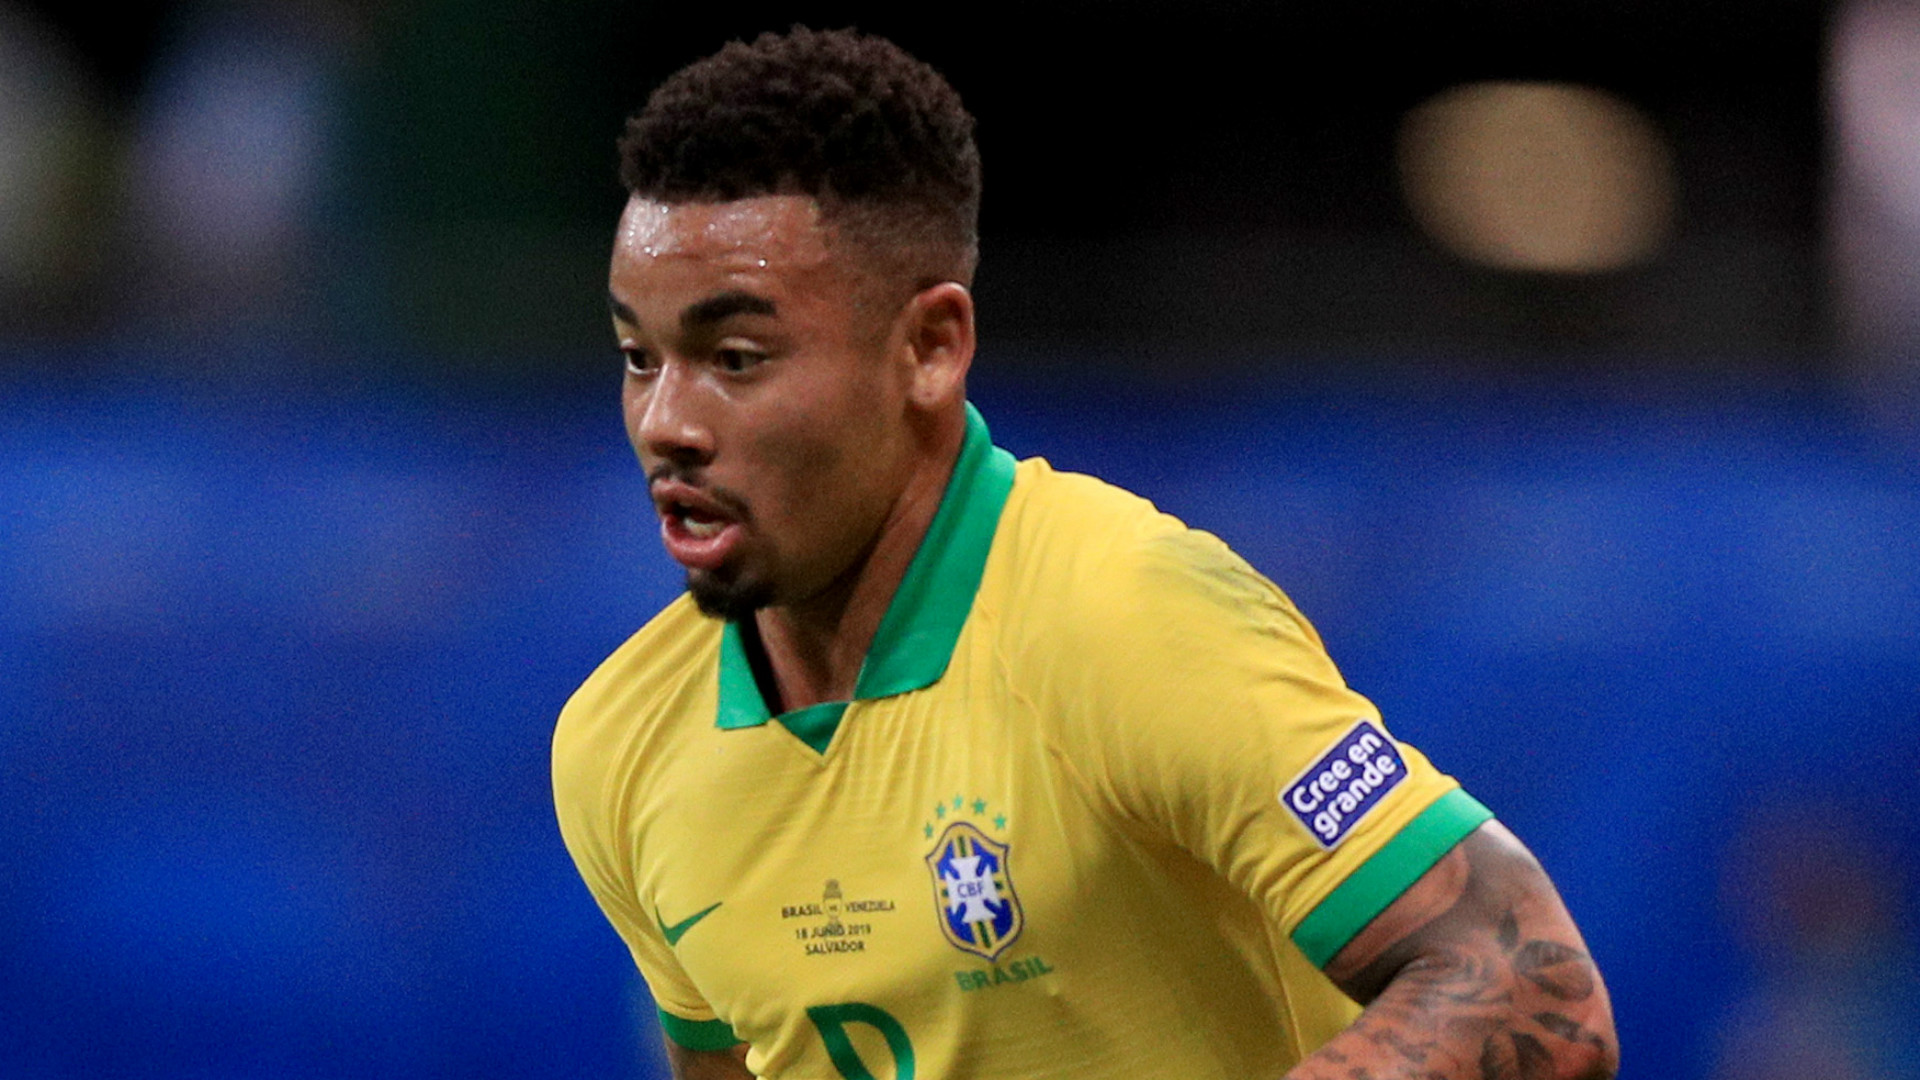 'If people took away hatred, things would work better' - Gabriel Jesus on overcoming criticism